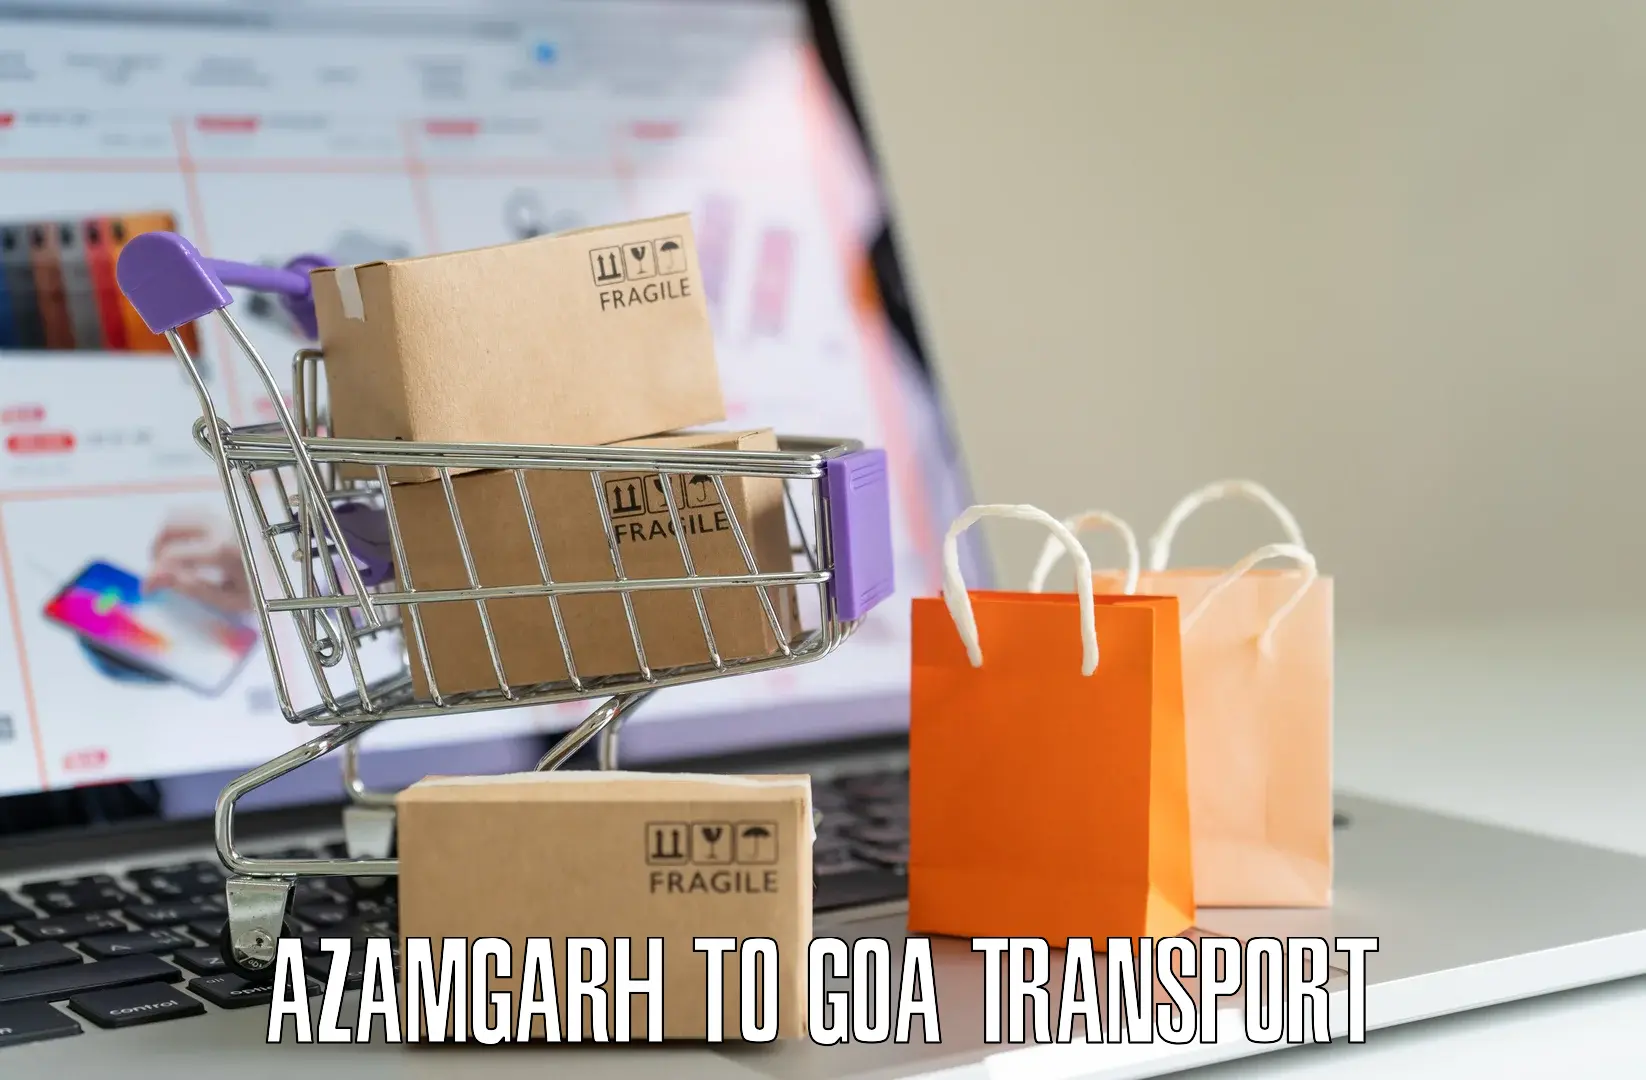 Road transport online services Azamgarh to Goa